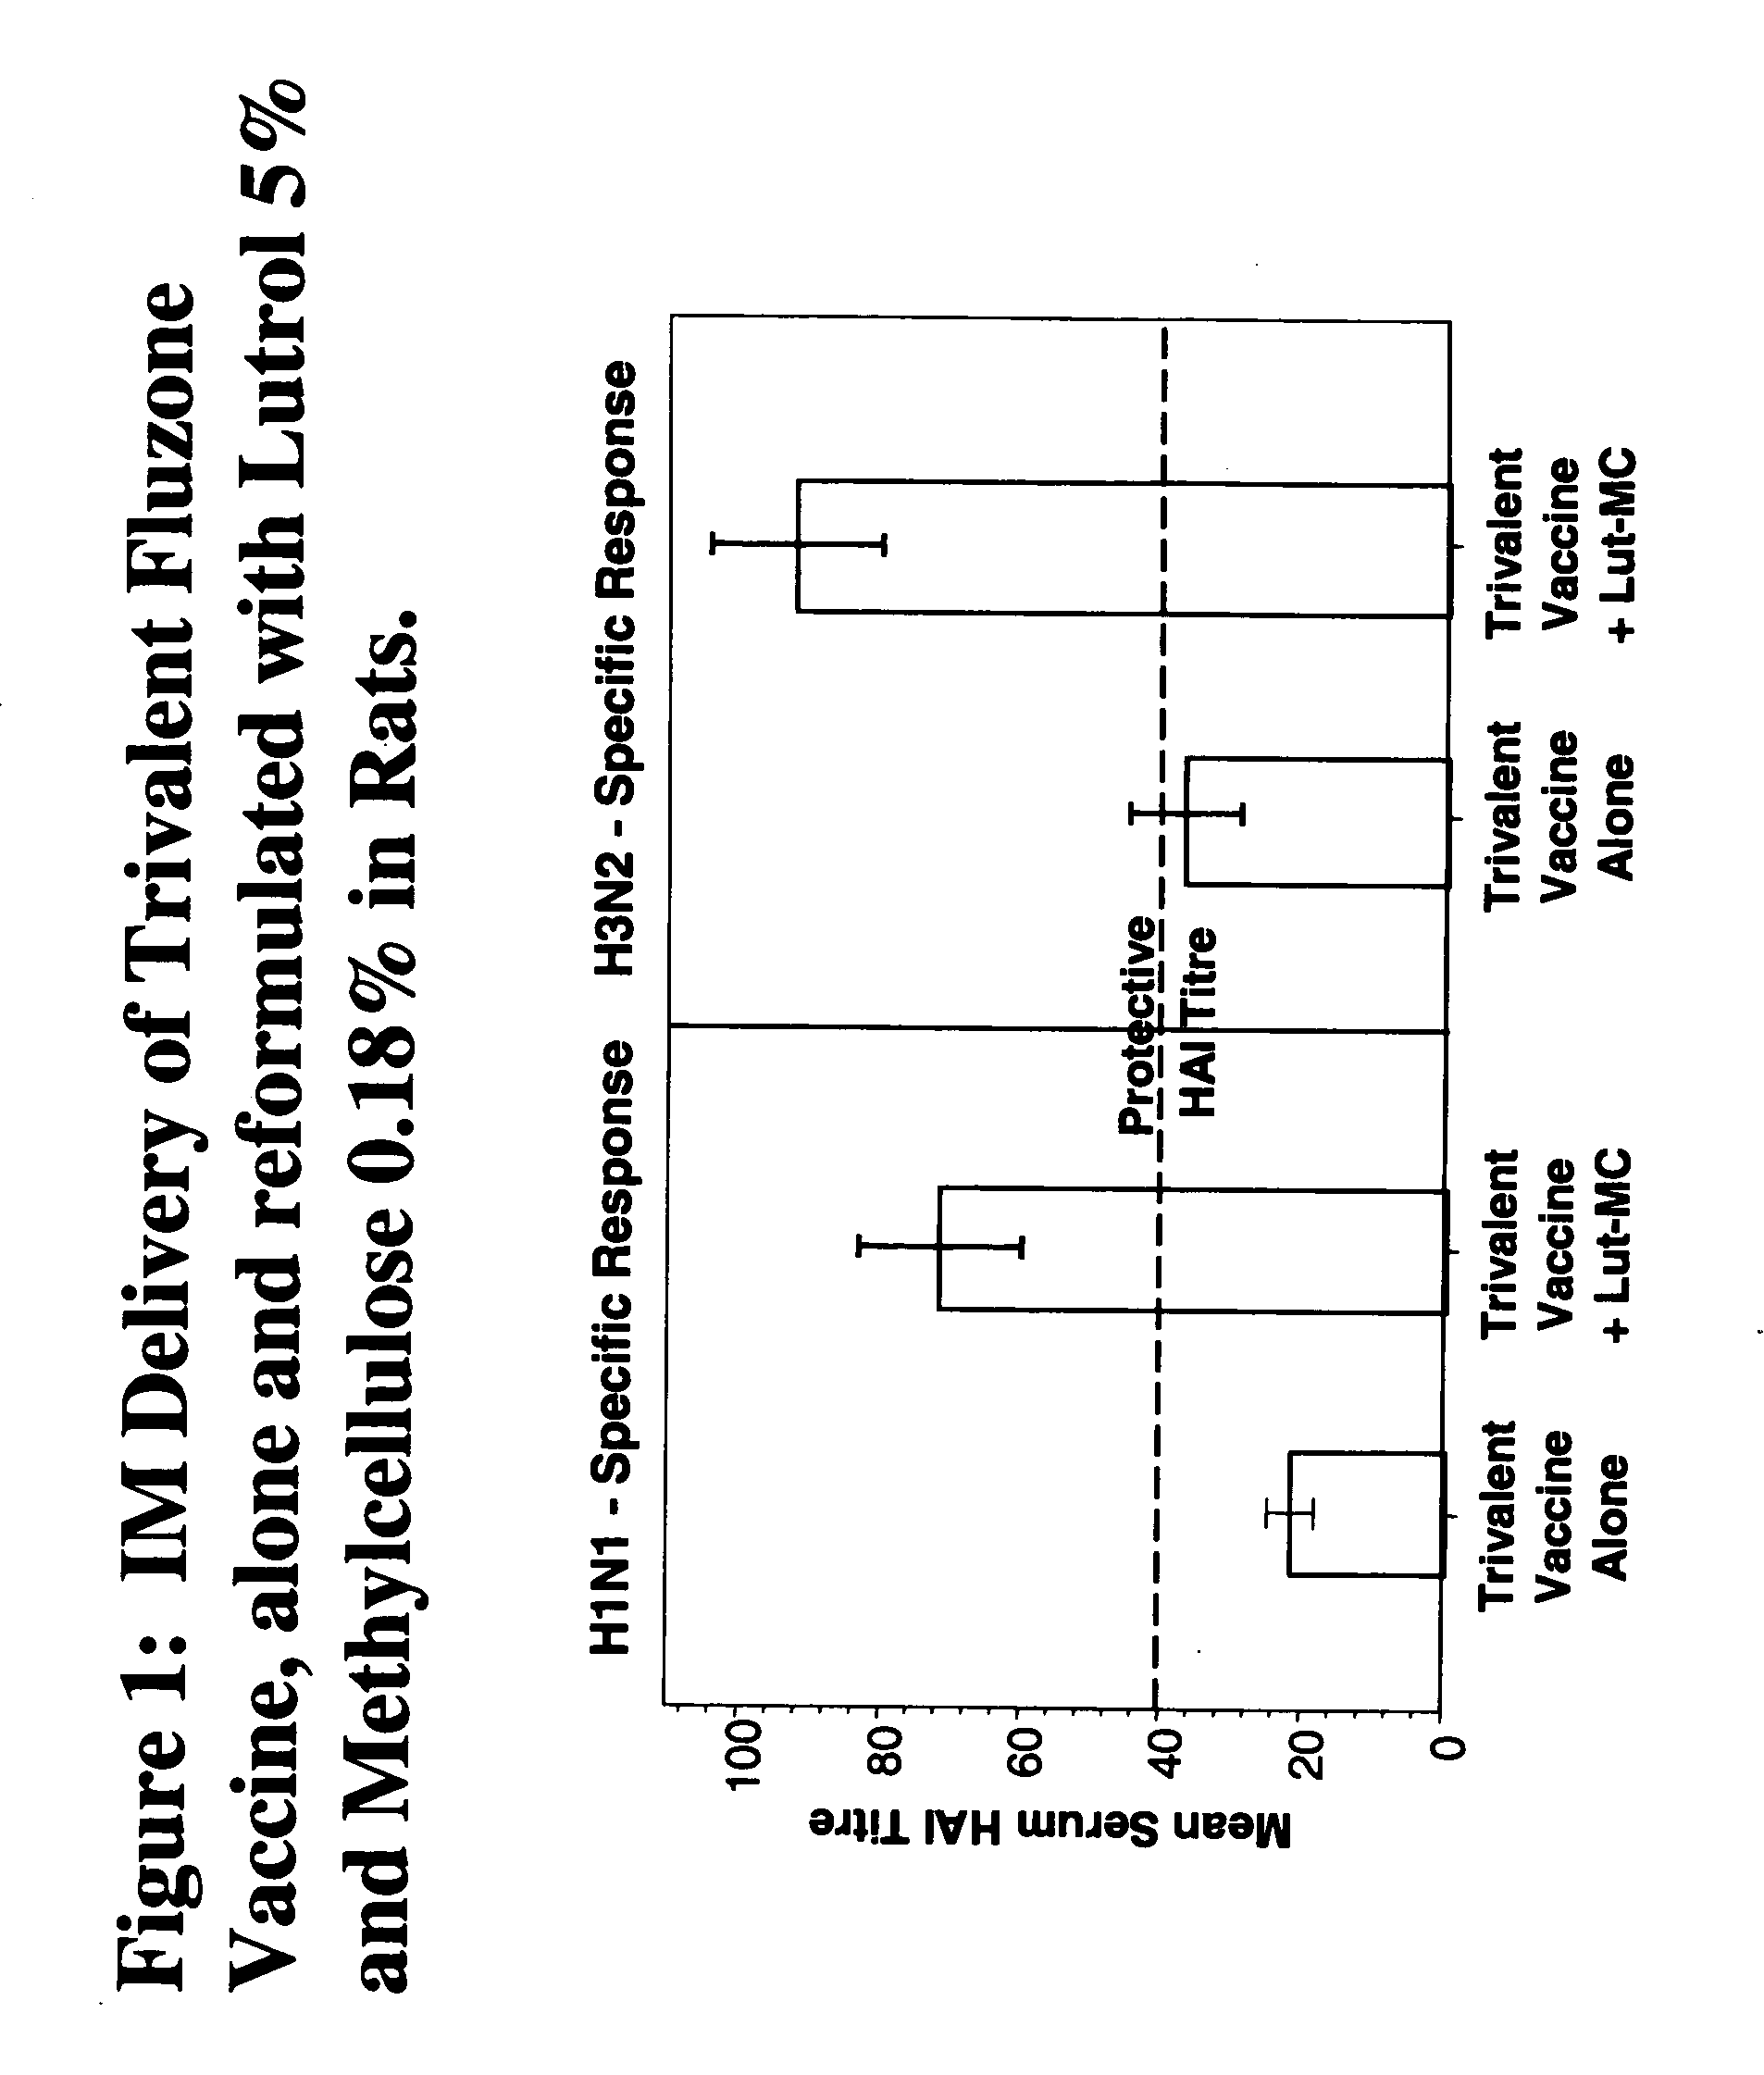 Compositions with enhanced immunogenicity